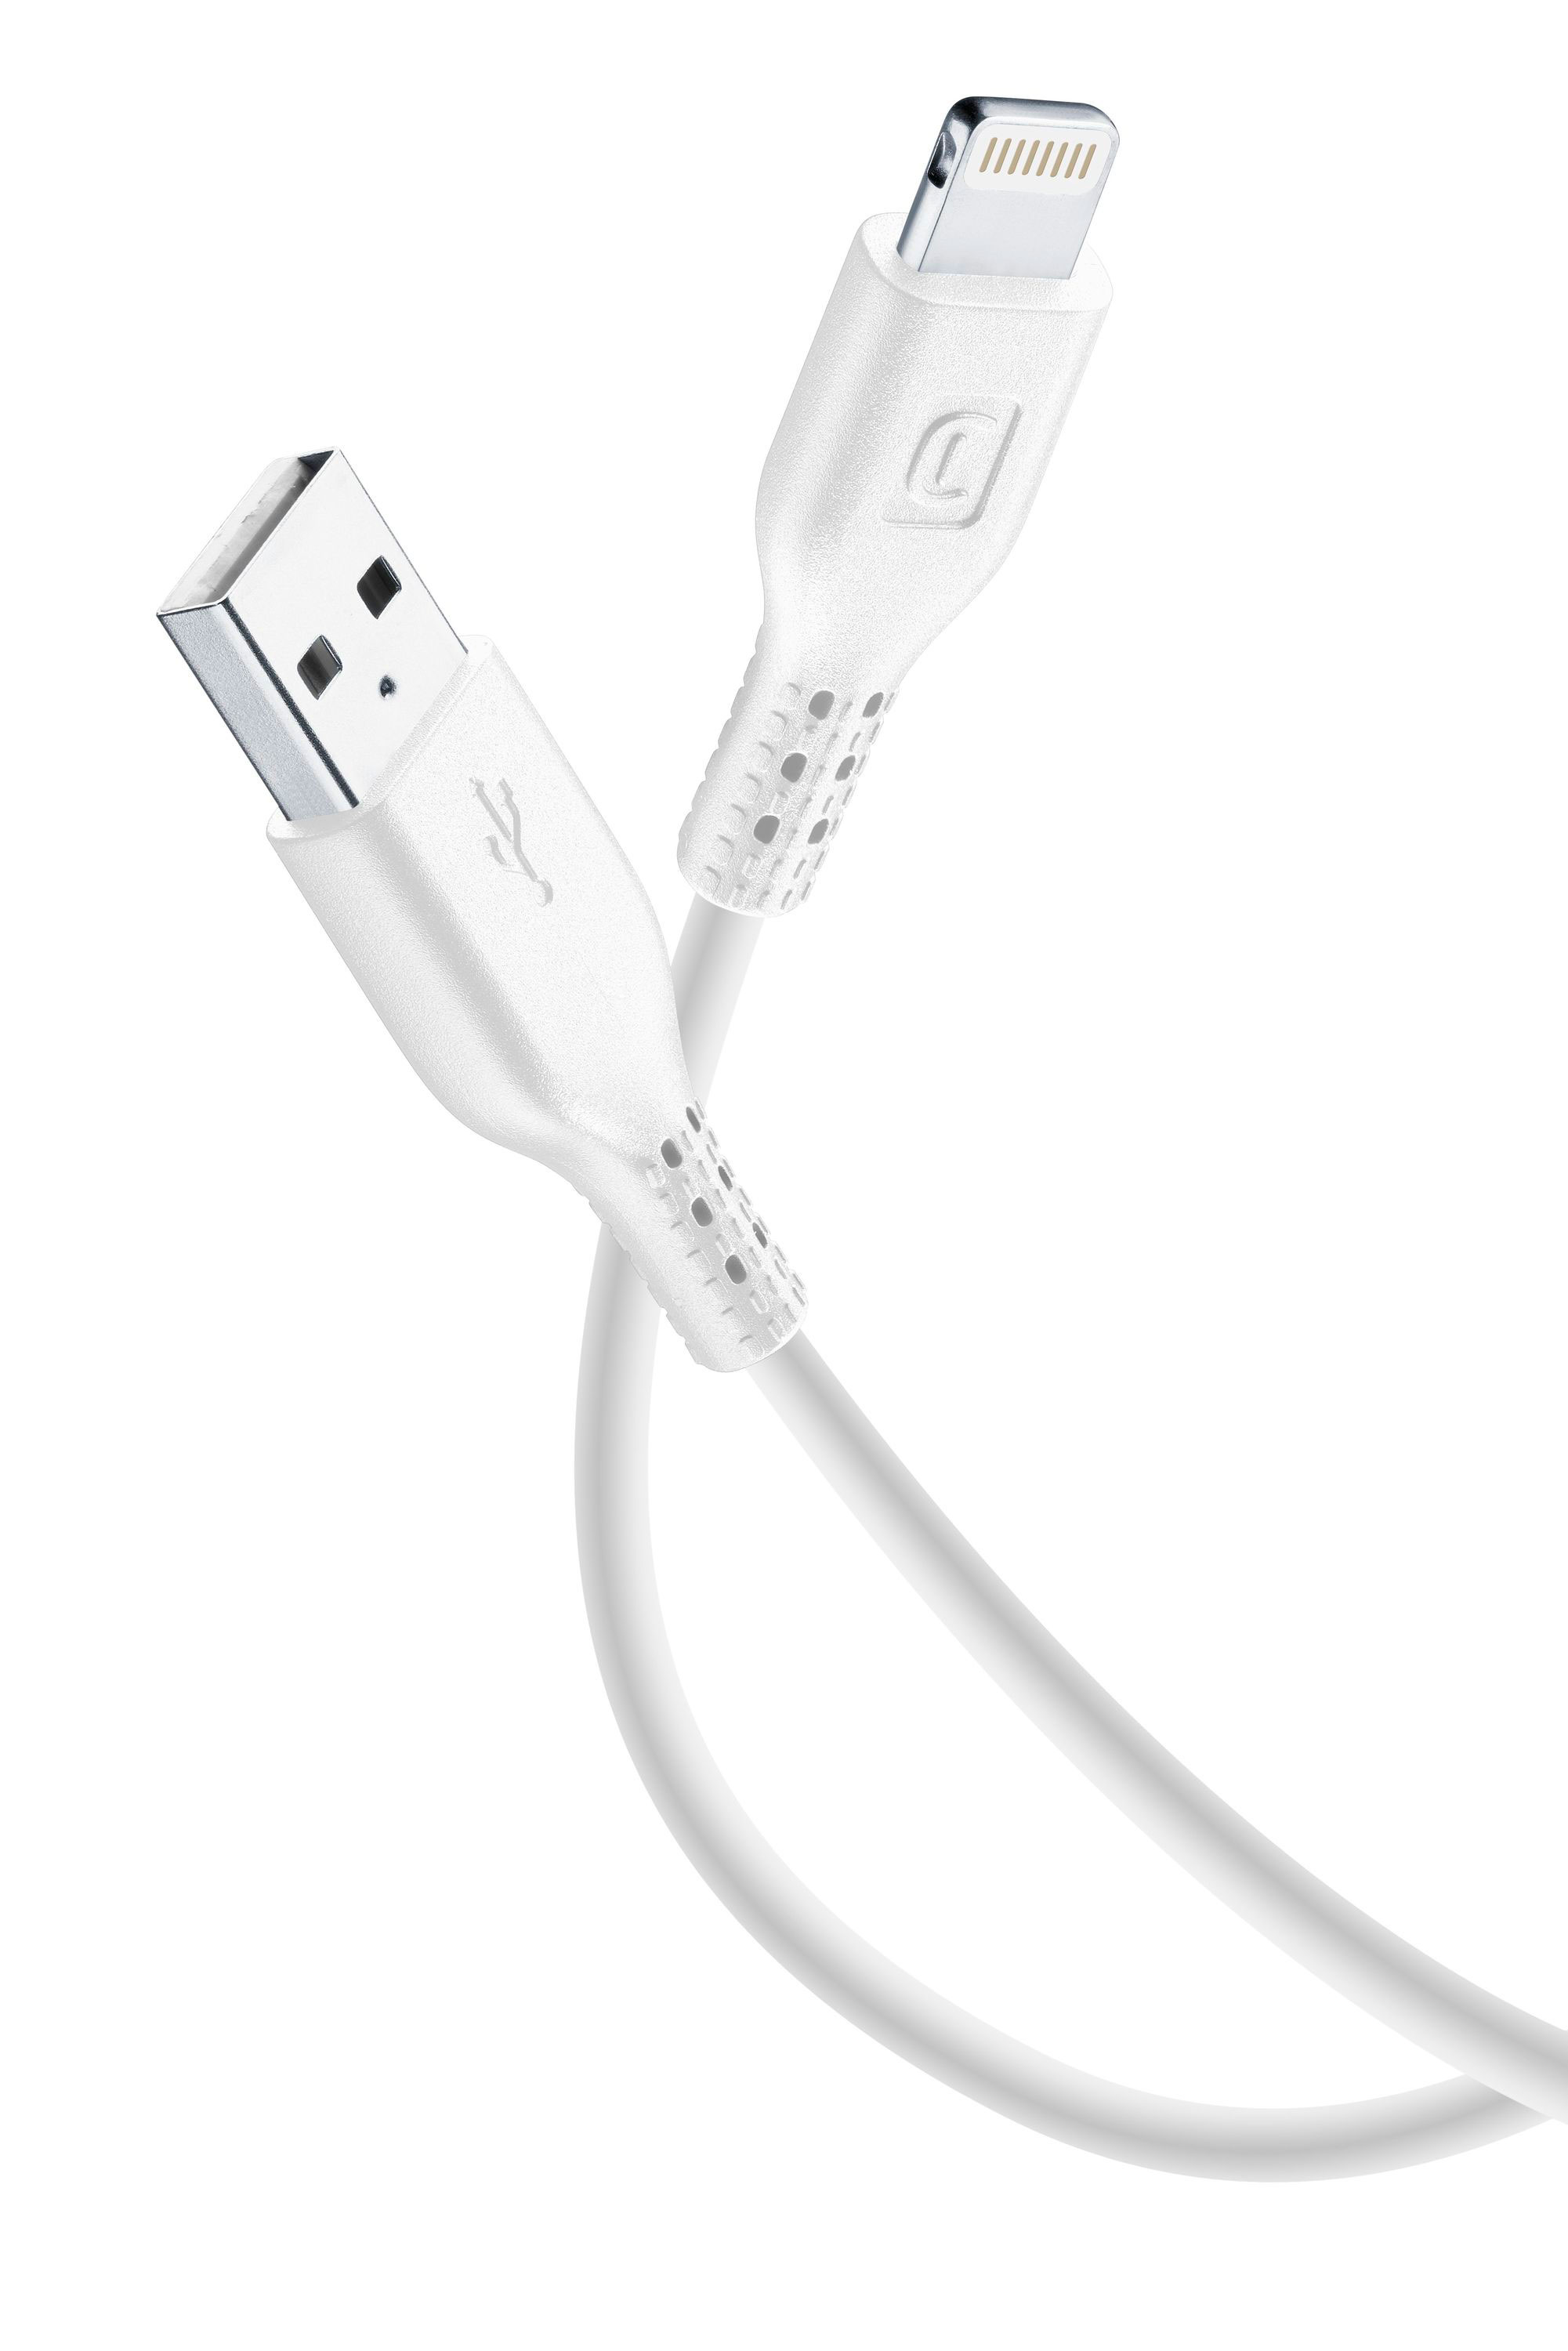 CELLULAR LINE POWER CABLE 300M WHITE